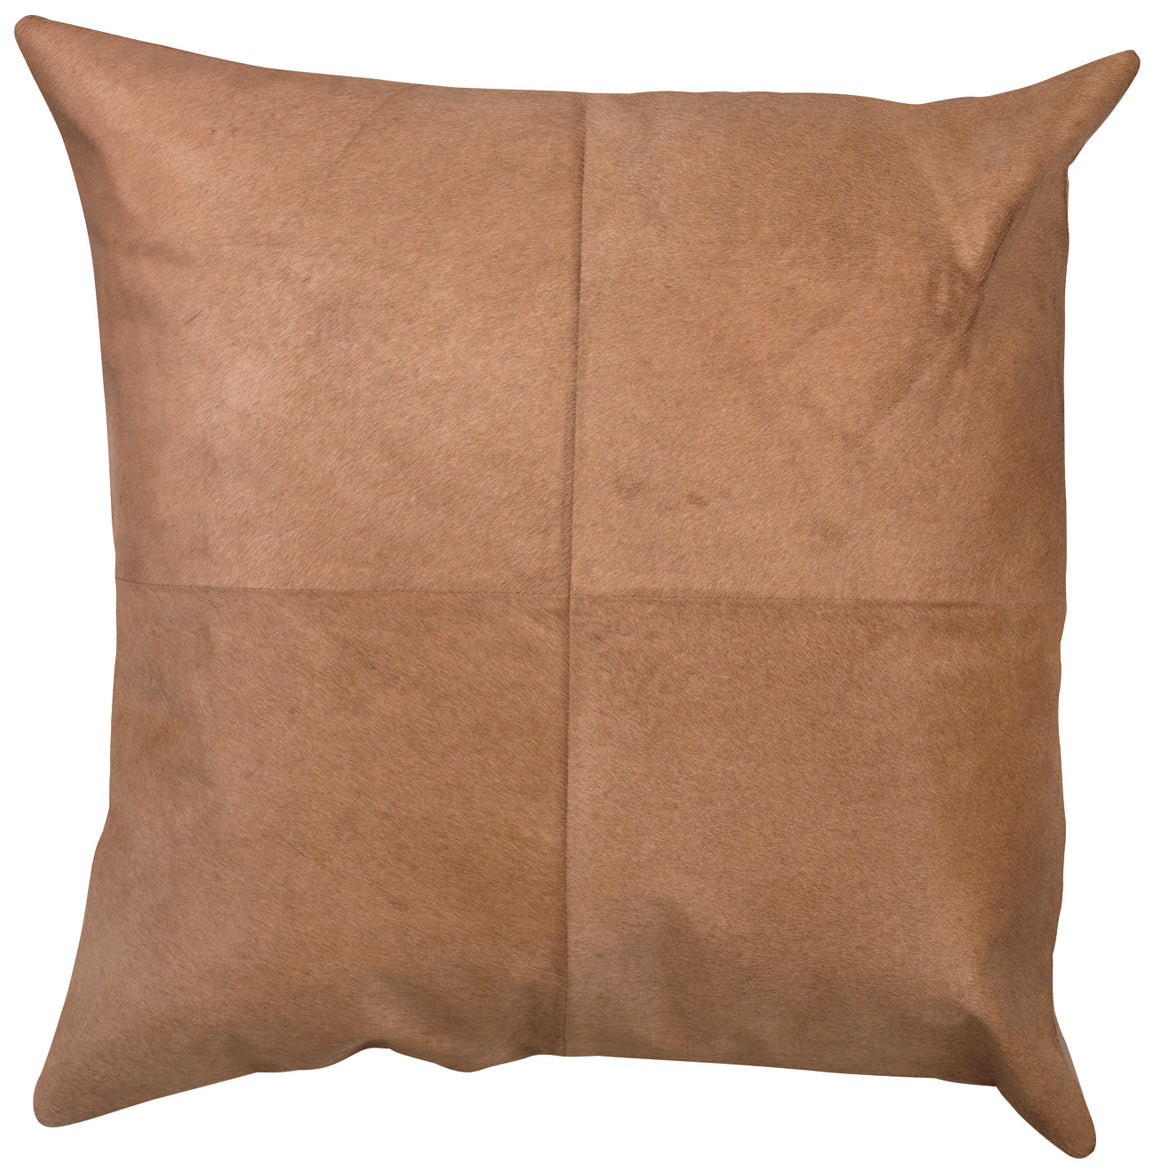 Buff Leather Pillow